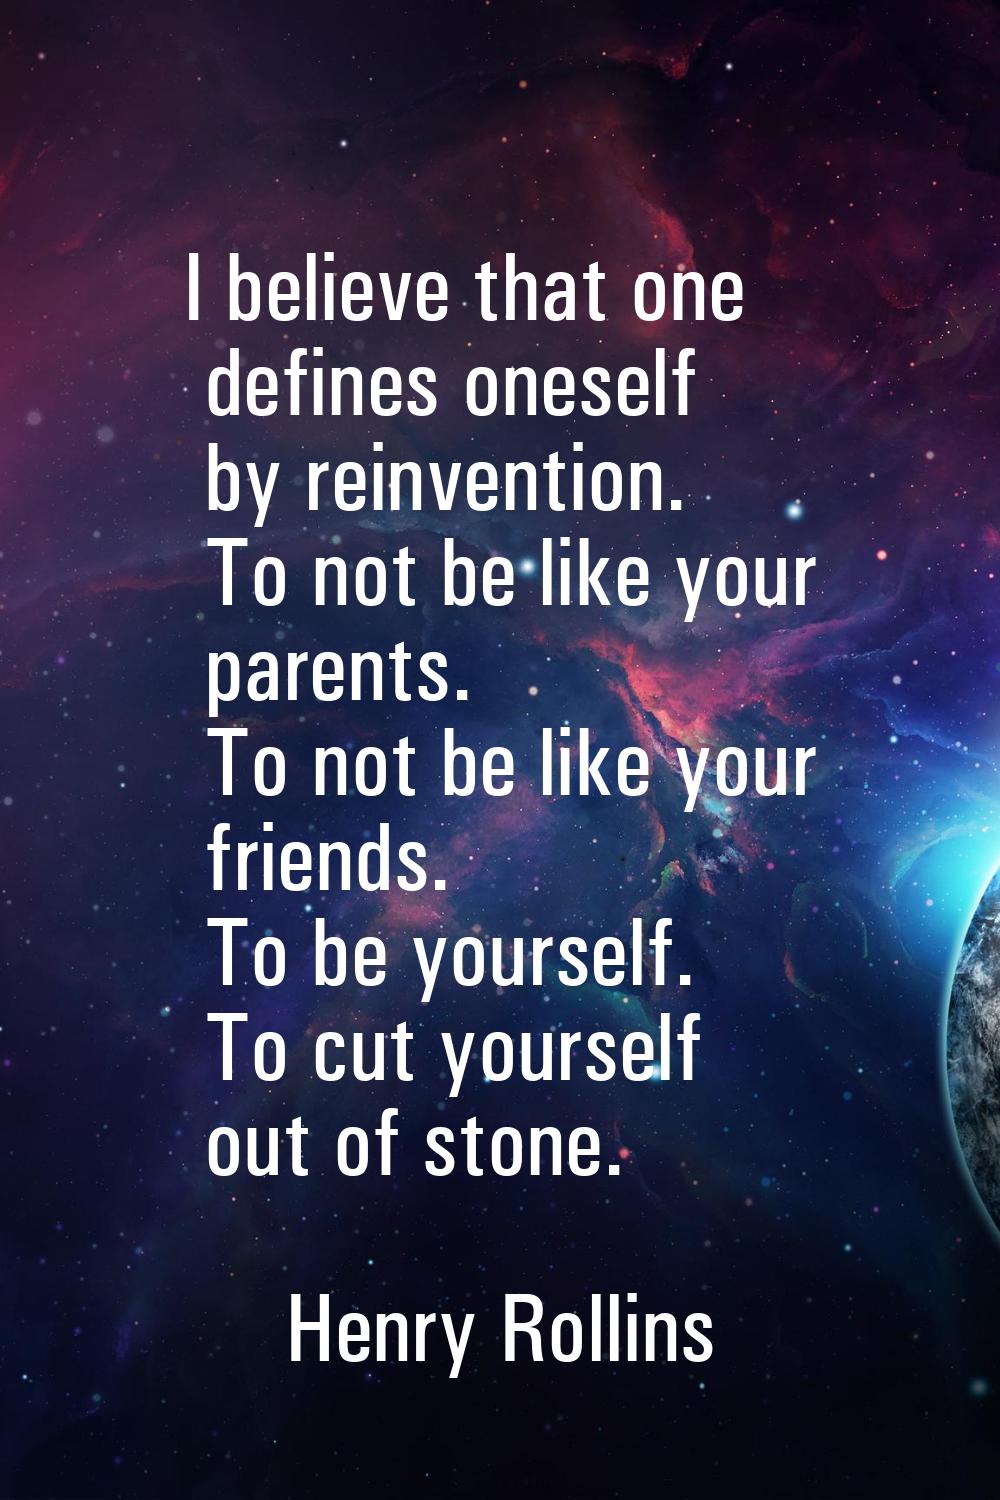 I believe that one defines oneself by reinvention. To not be like your parents. To not be like your